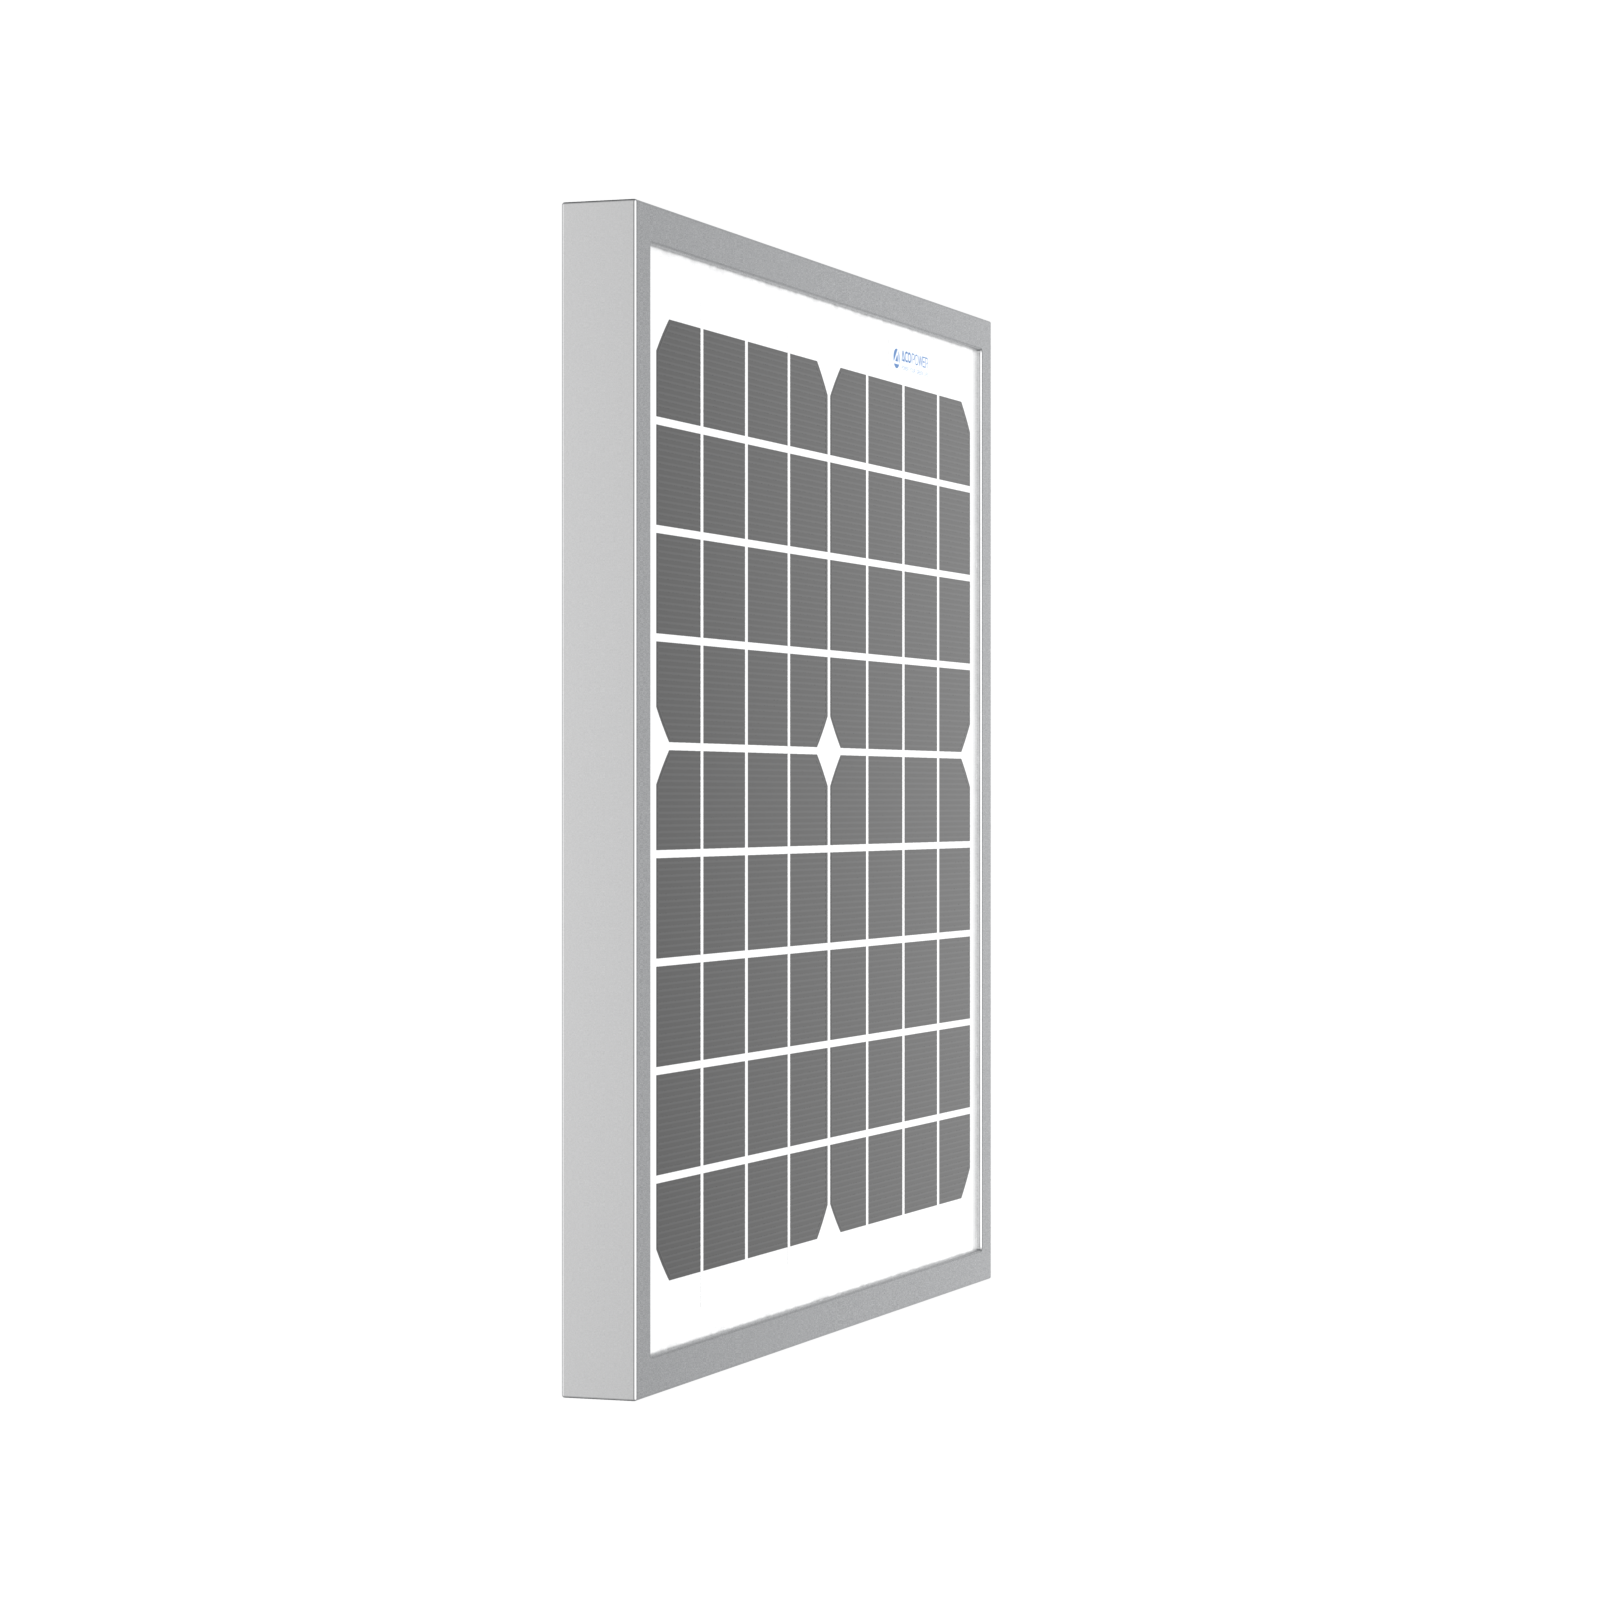 ACOPower 10W Mono Solar Panel for 12V Battery Charging RV Boat, Off Grid